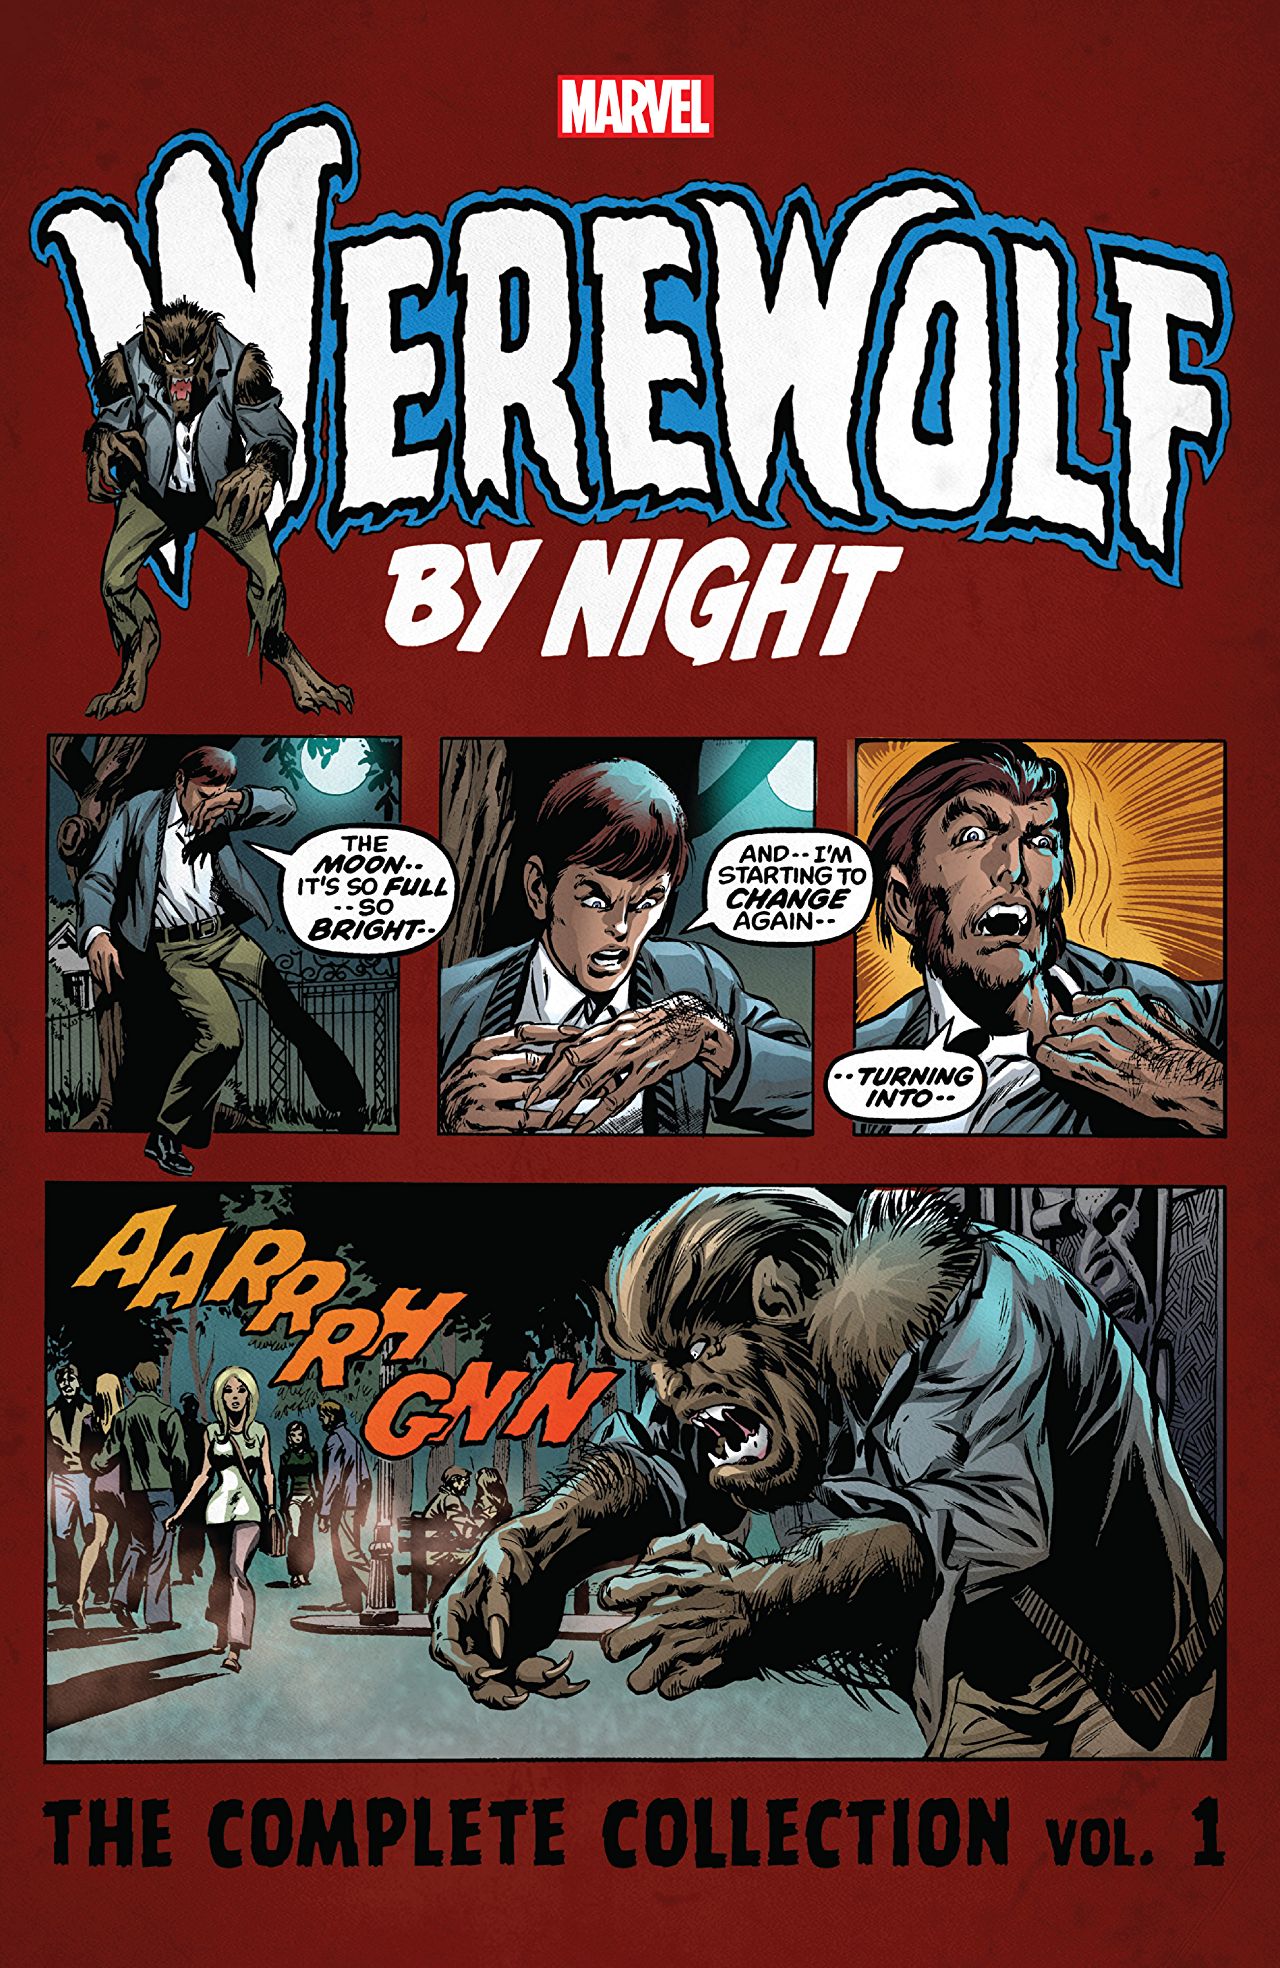 'Werewolf By Night: The Complete Collection' Vol. 1 review: A must-own for horror comic fans